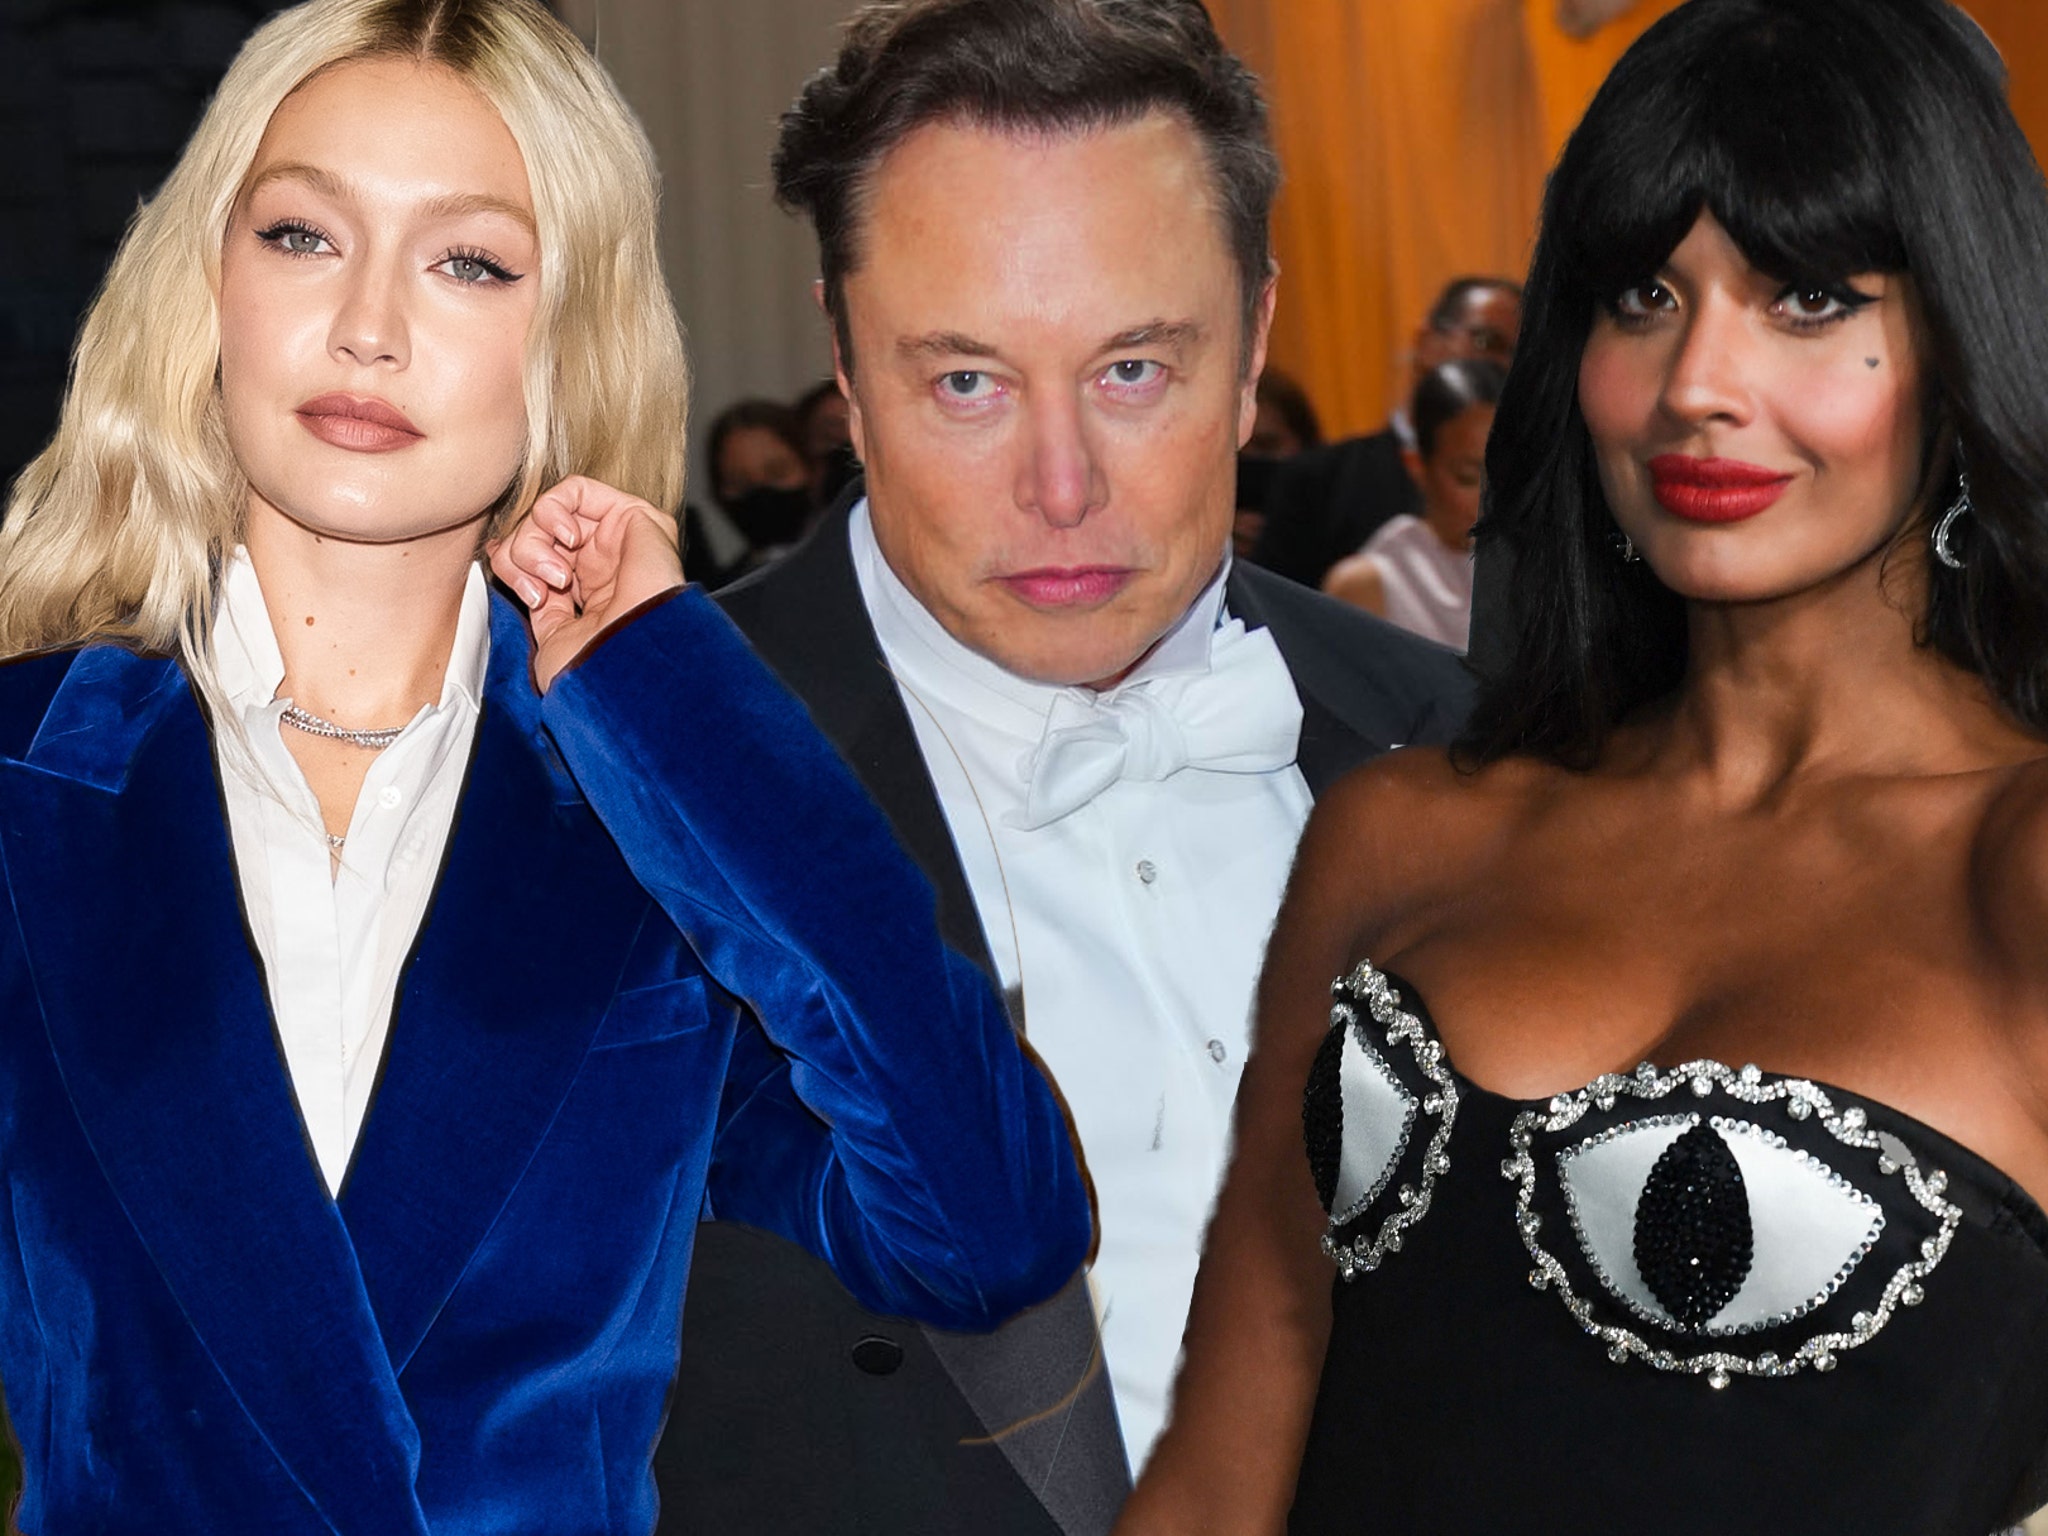 14 celebrities who got cancelled in 2022, from Elon Musk's Twitter